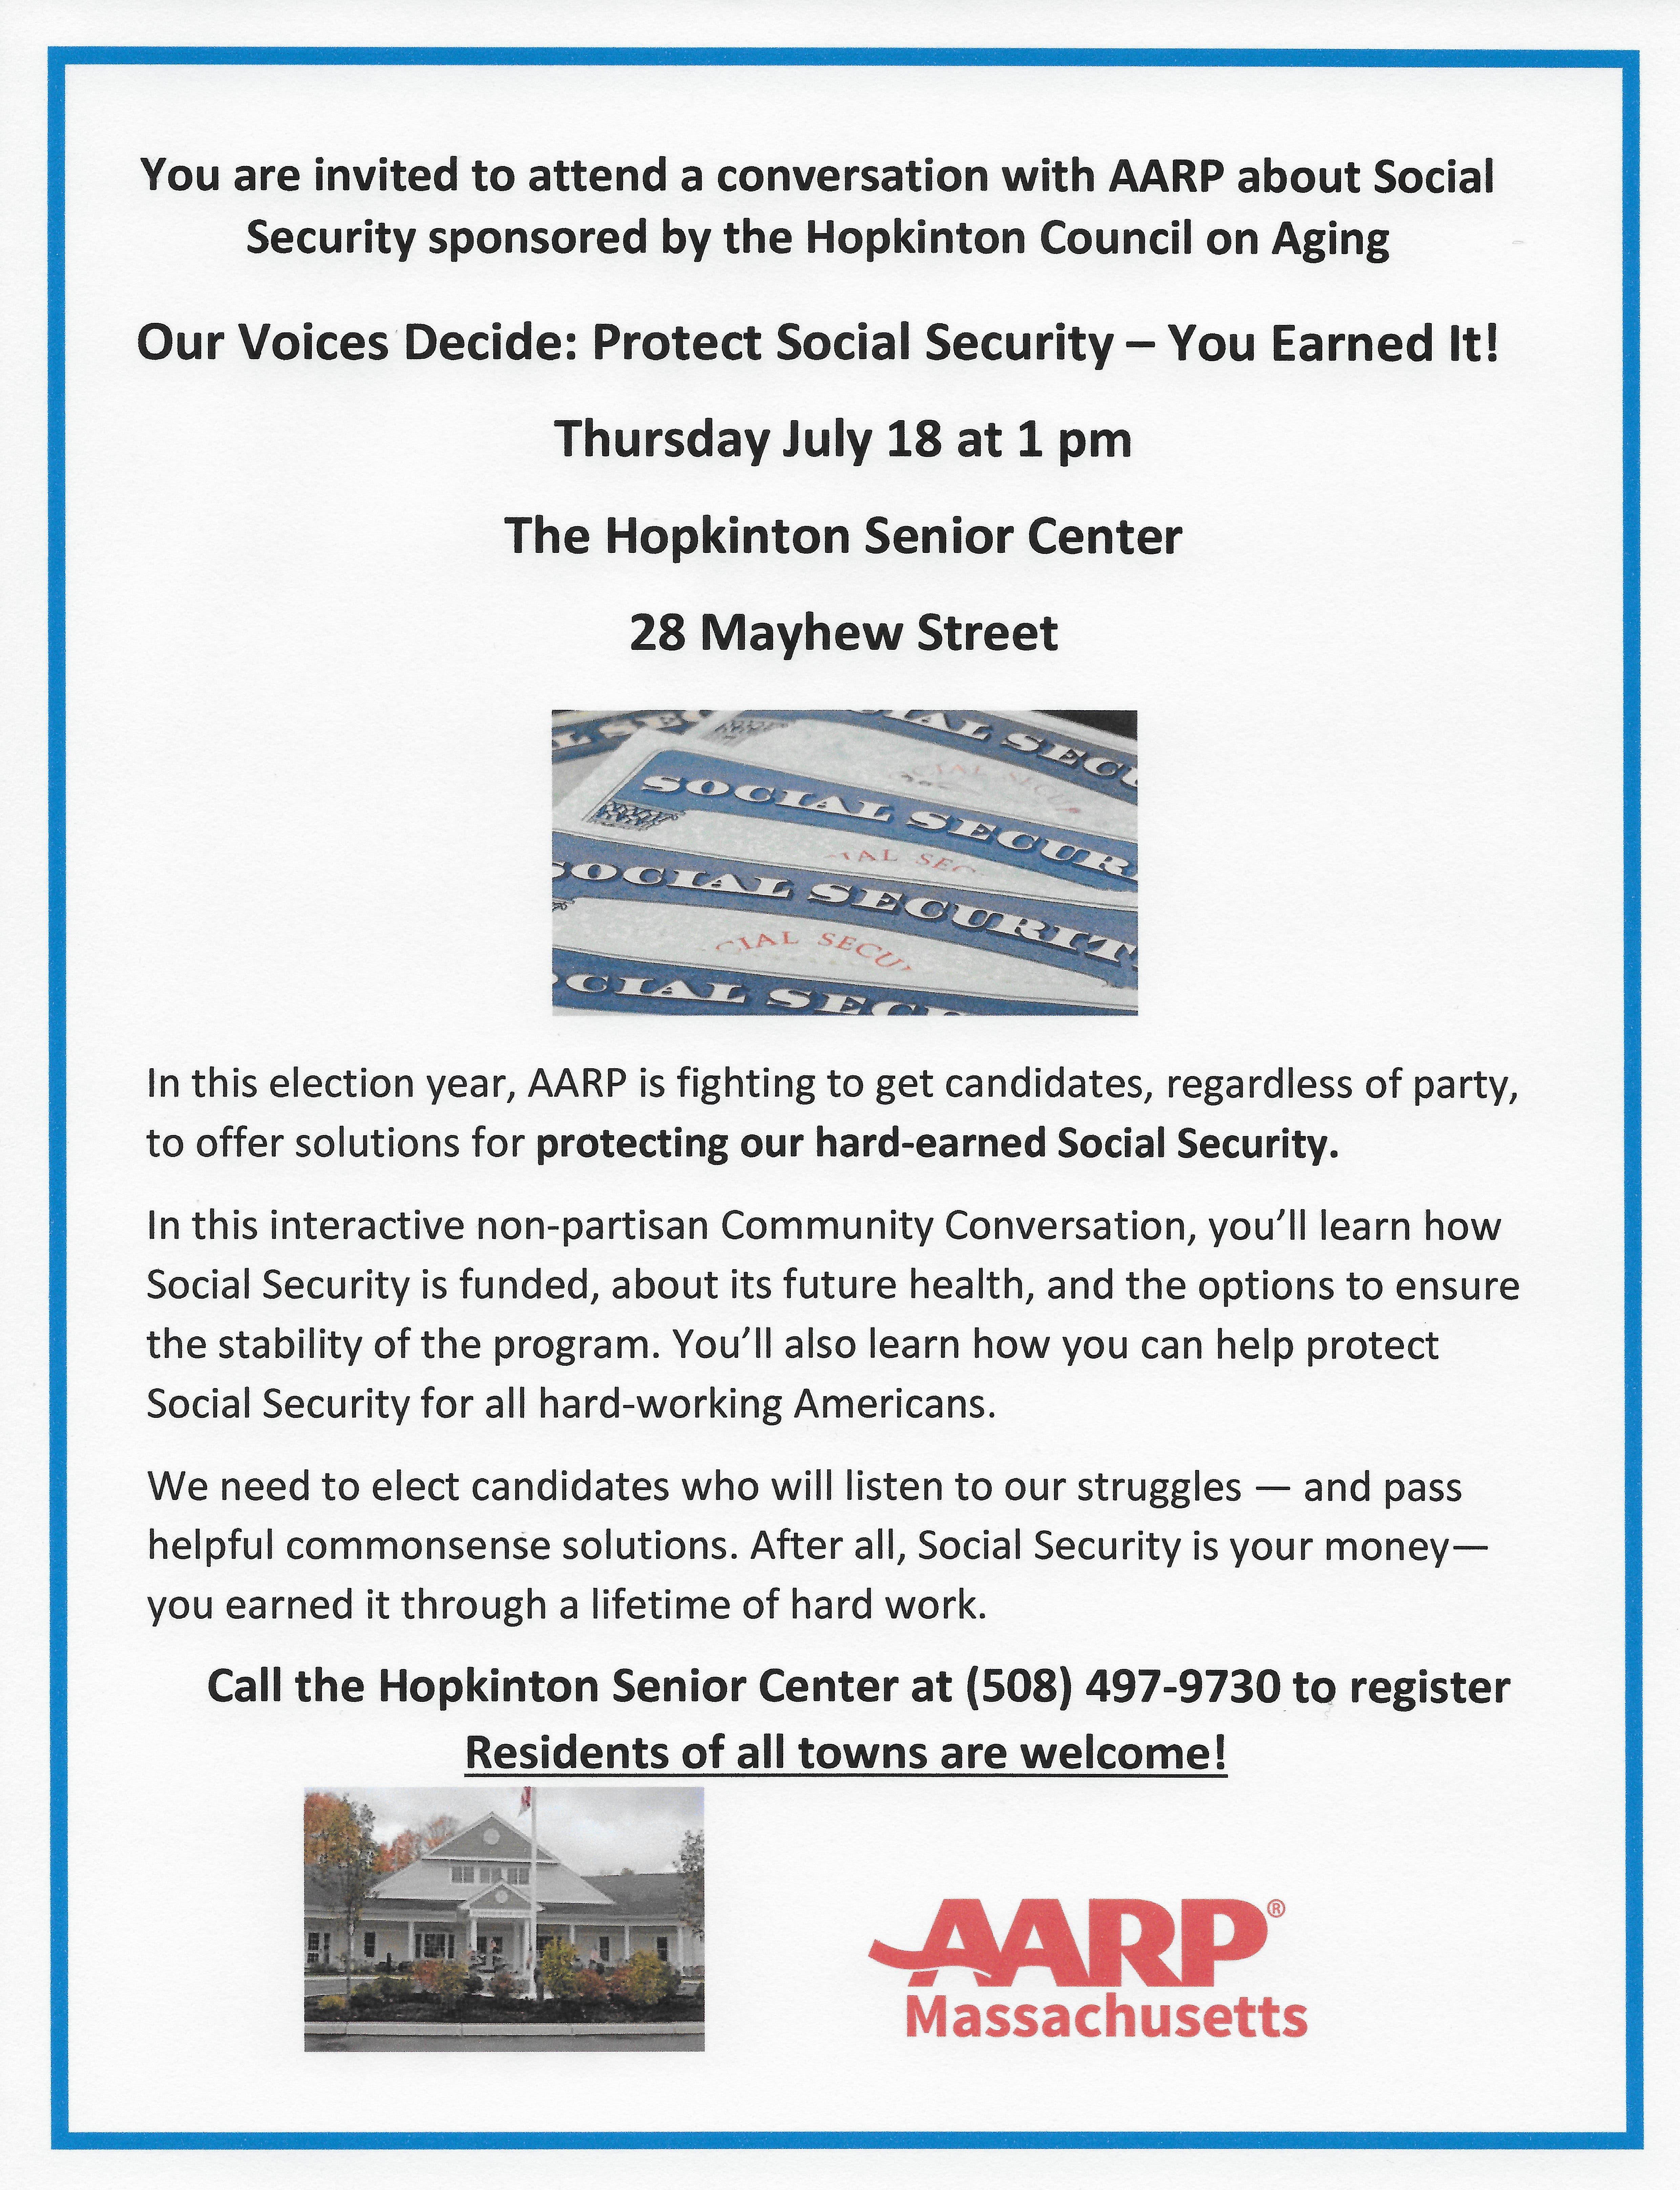 Our Voices Decide: Protect Social Security – You Earned It!